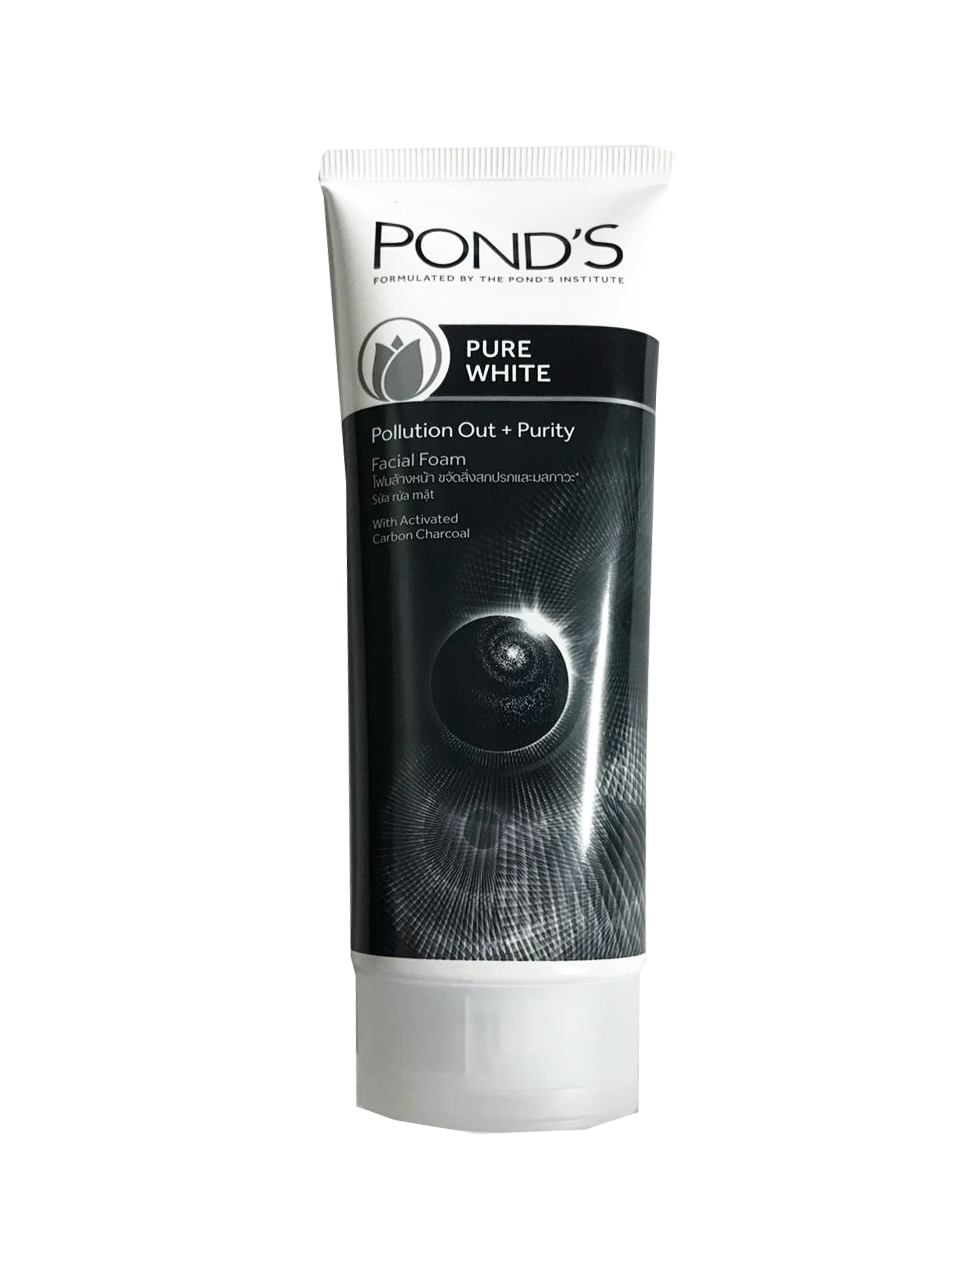 Ponds Pure White Facial Foam for Pollution Out + Purity 100g